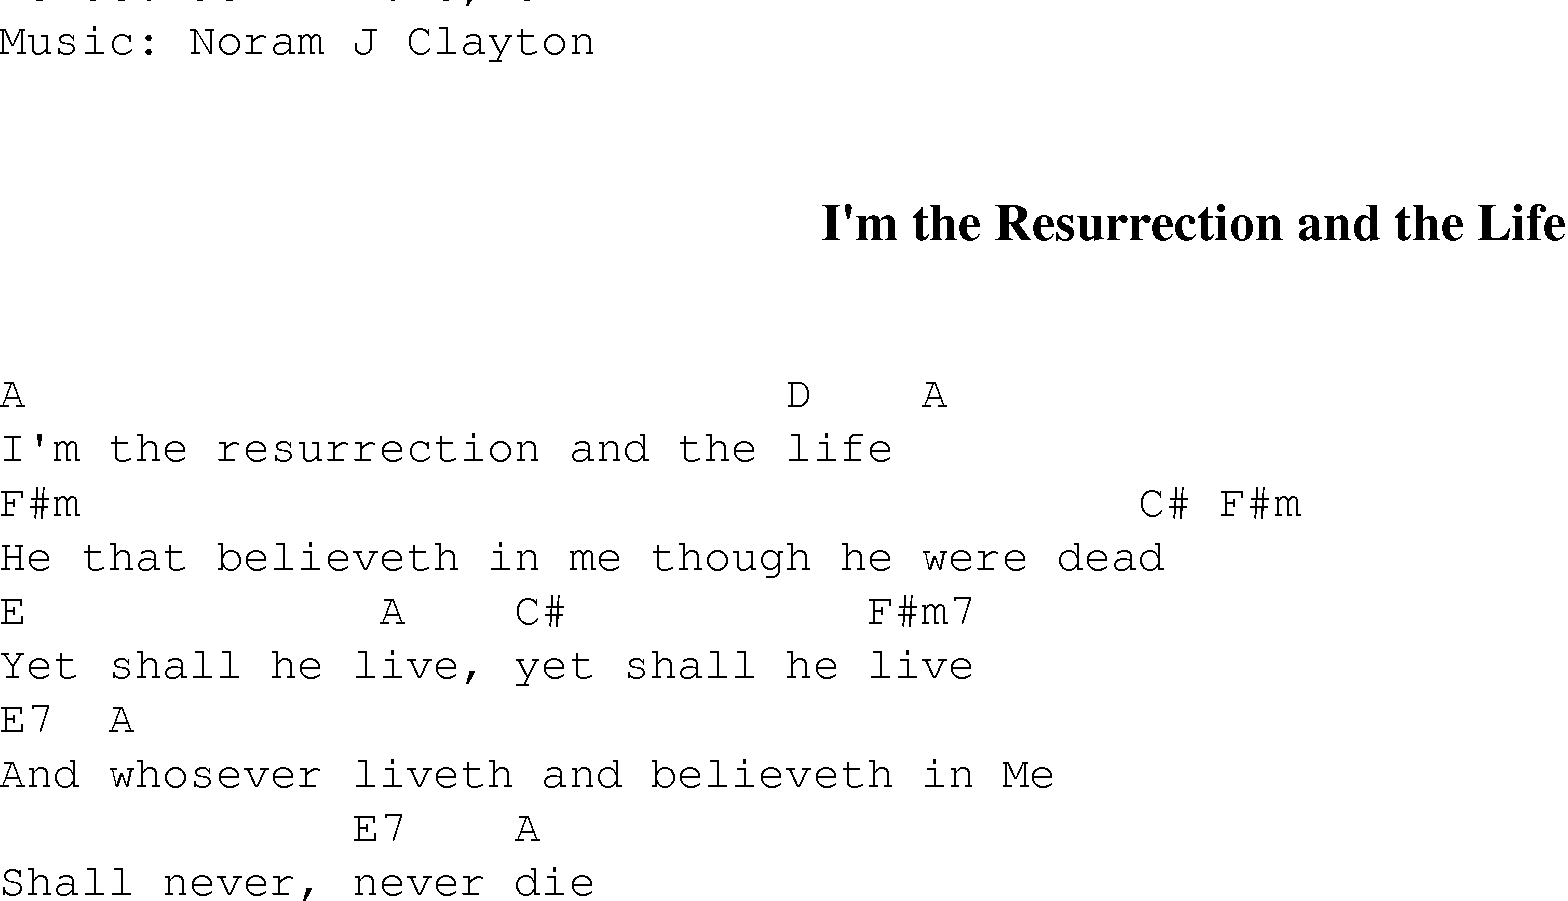 Gospel Song: im_the_resurrection_and_the_life, lyrics and chords.